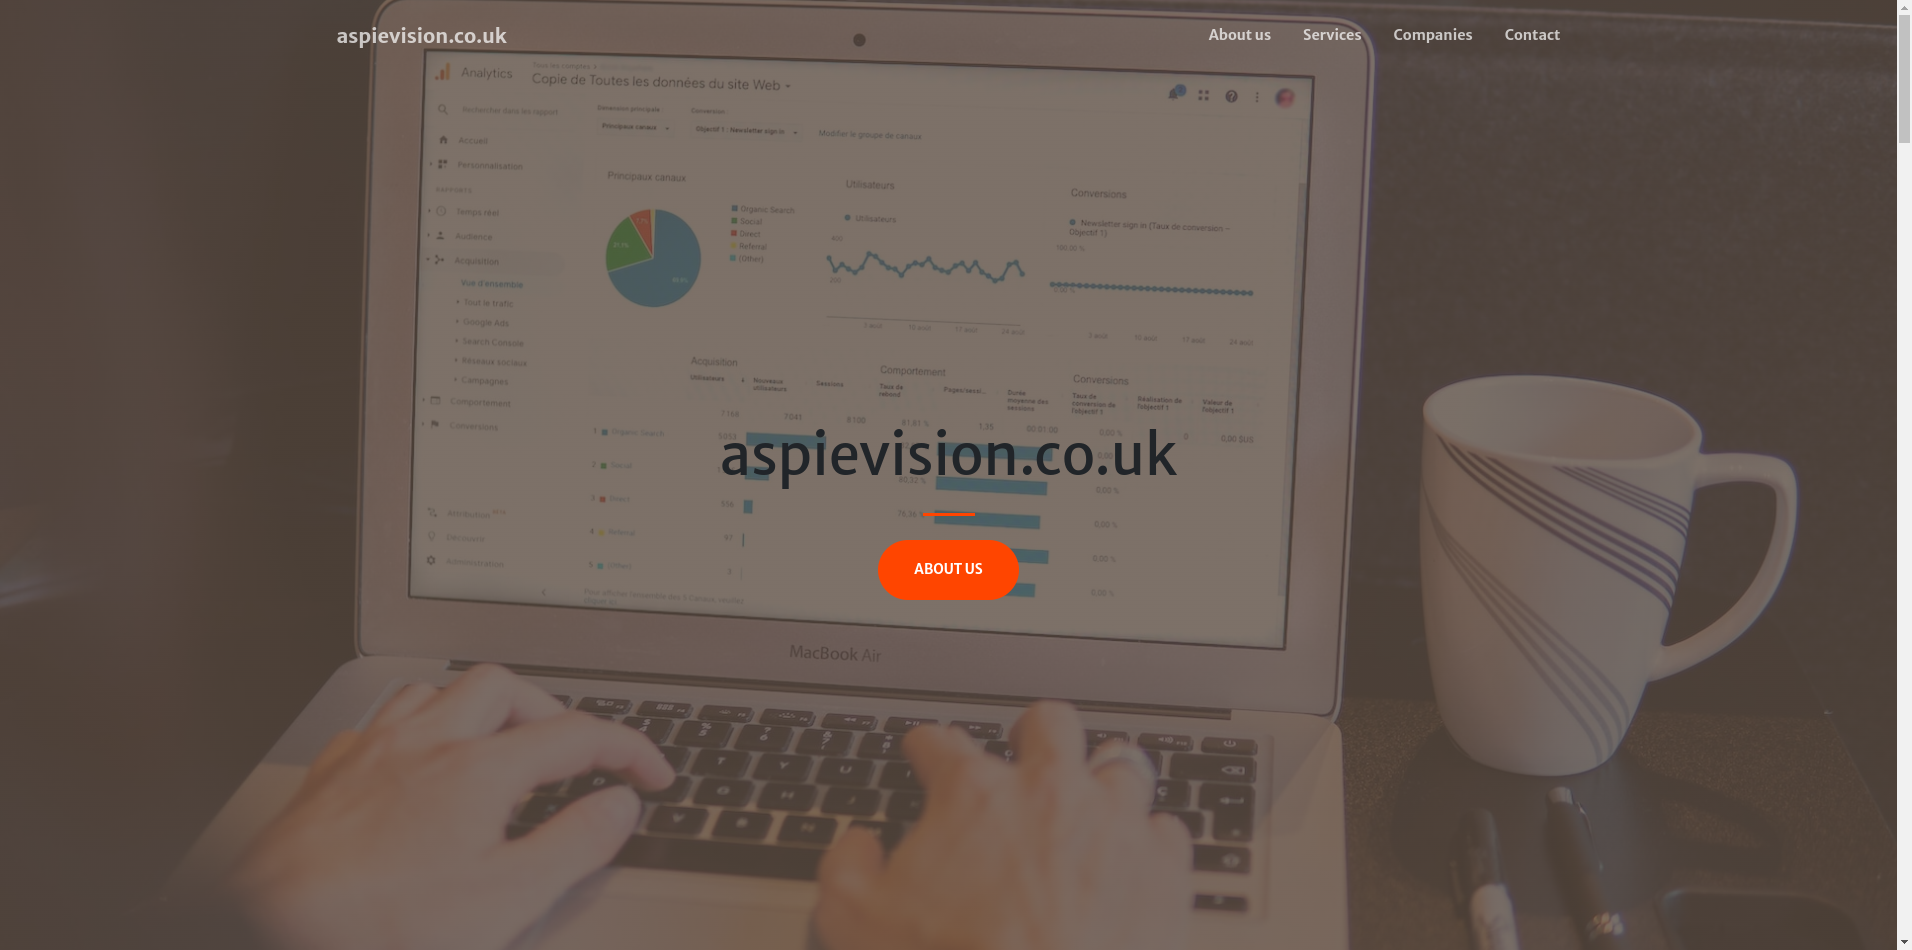 aspievision.co.uk